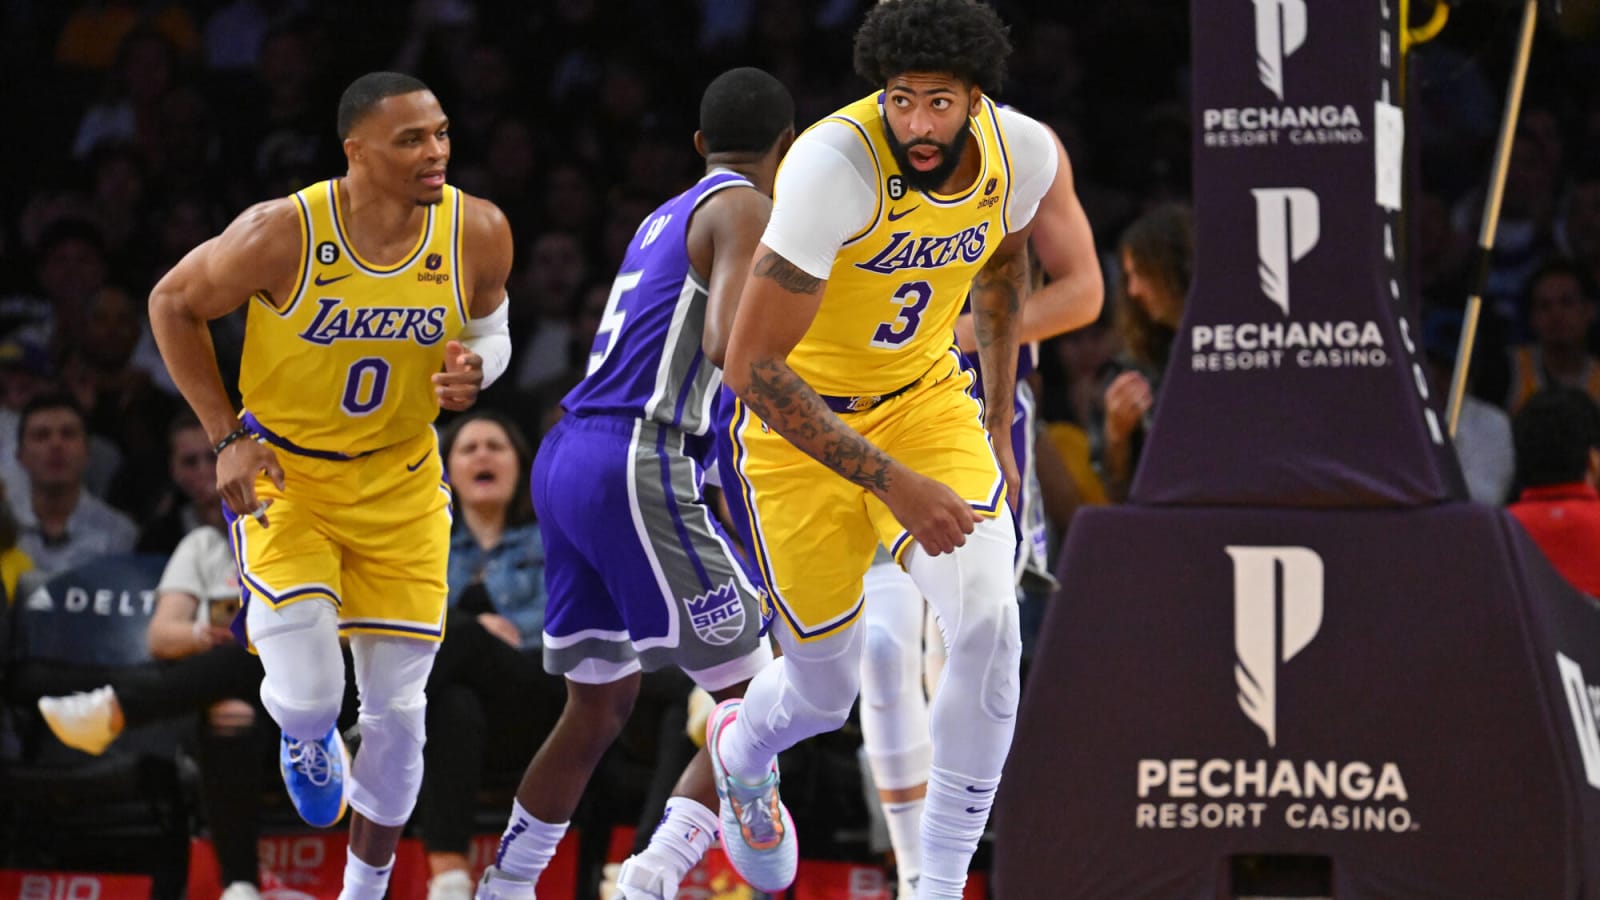 The Lakers Fans Booed Their Team In The First Preseason Game As They Lost By 30 Points Against The Sacramento Kings